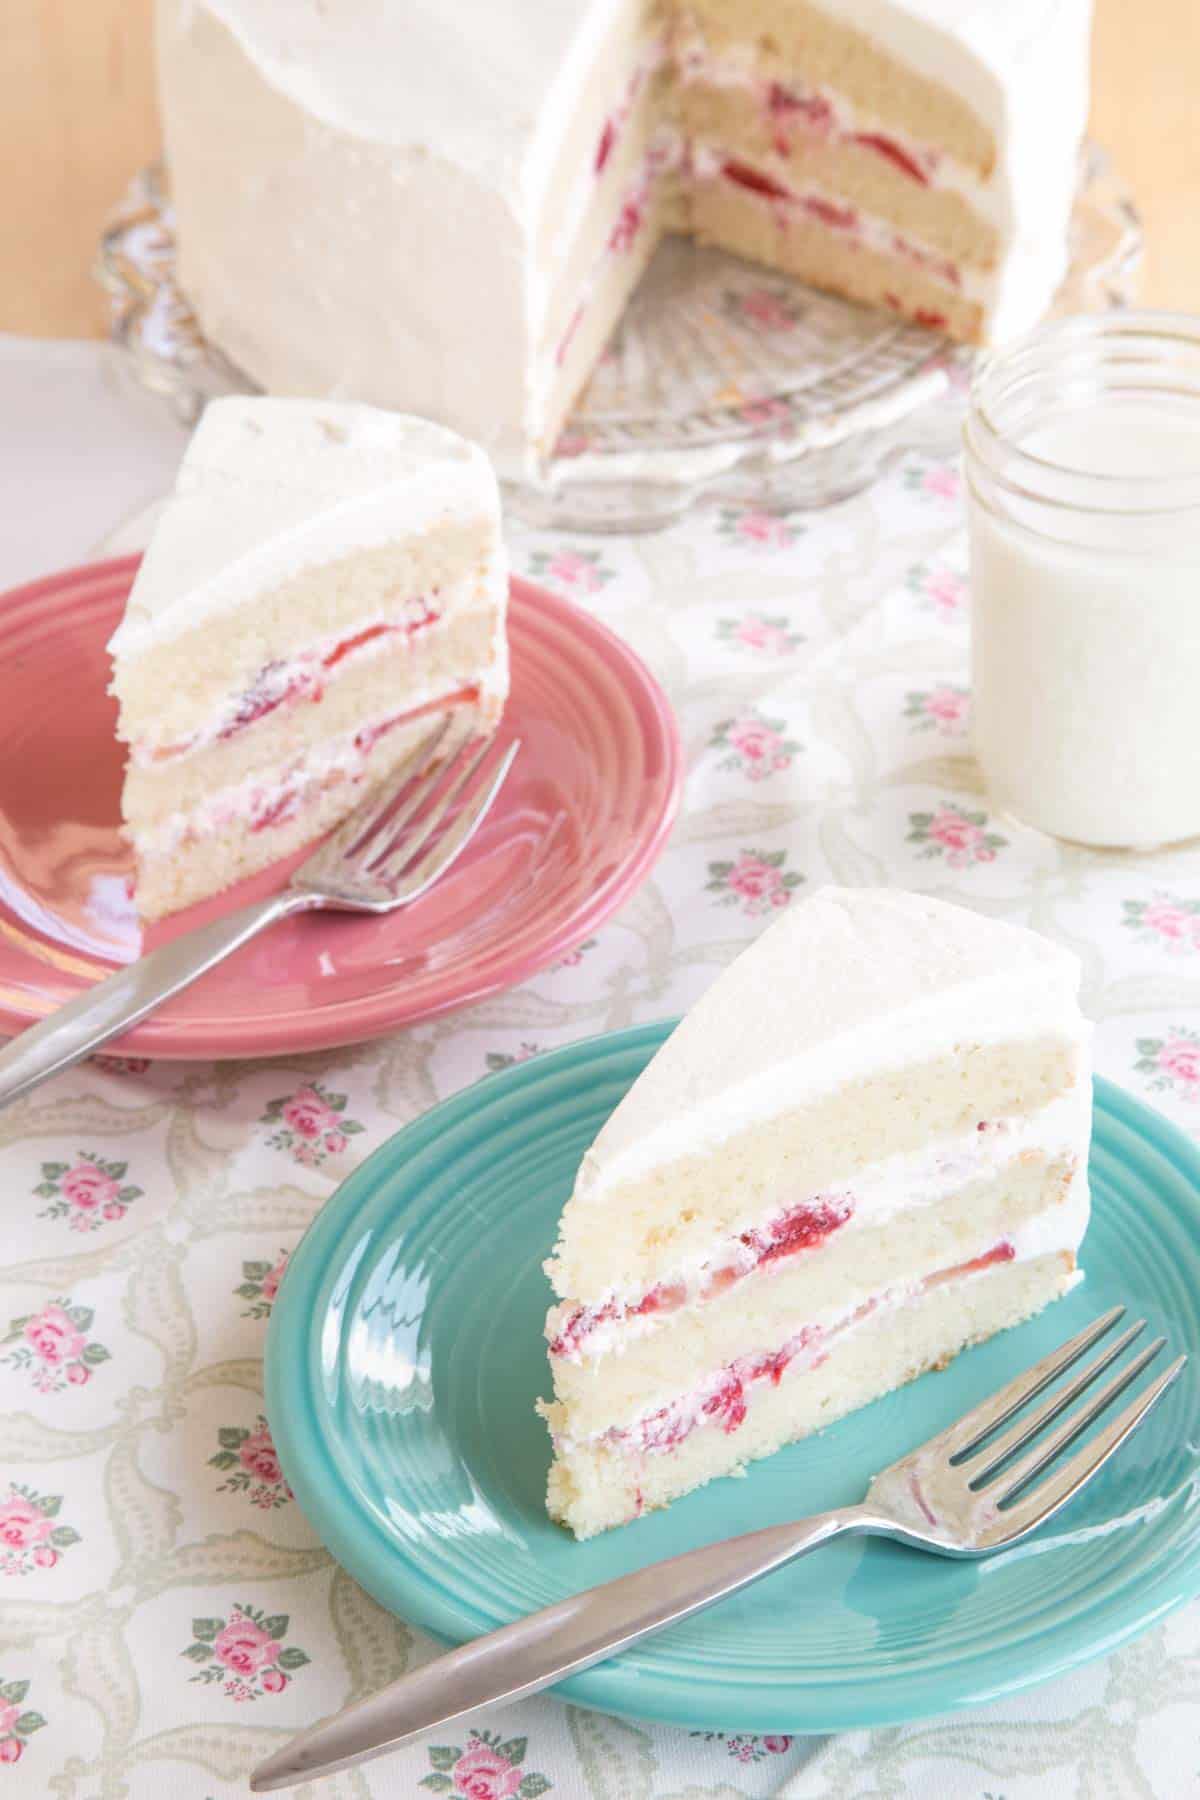 Two pieces of cake on plates on top of a tablecloth with pink roses.